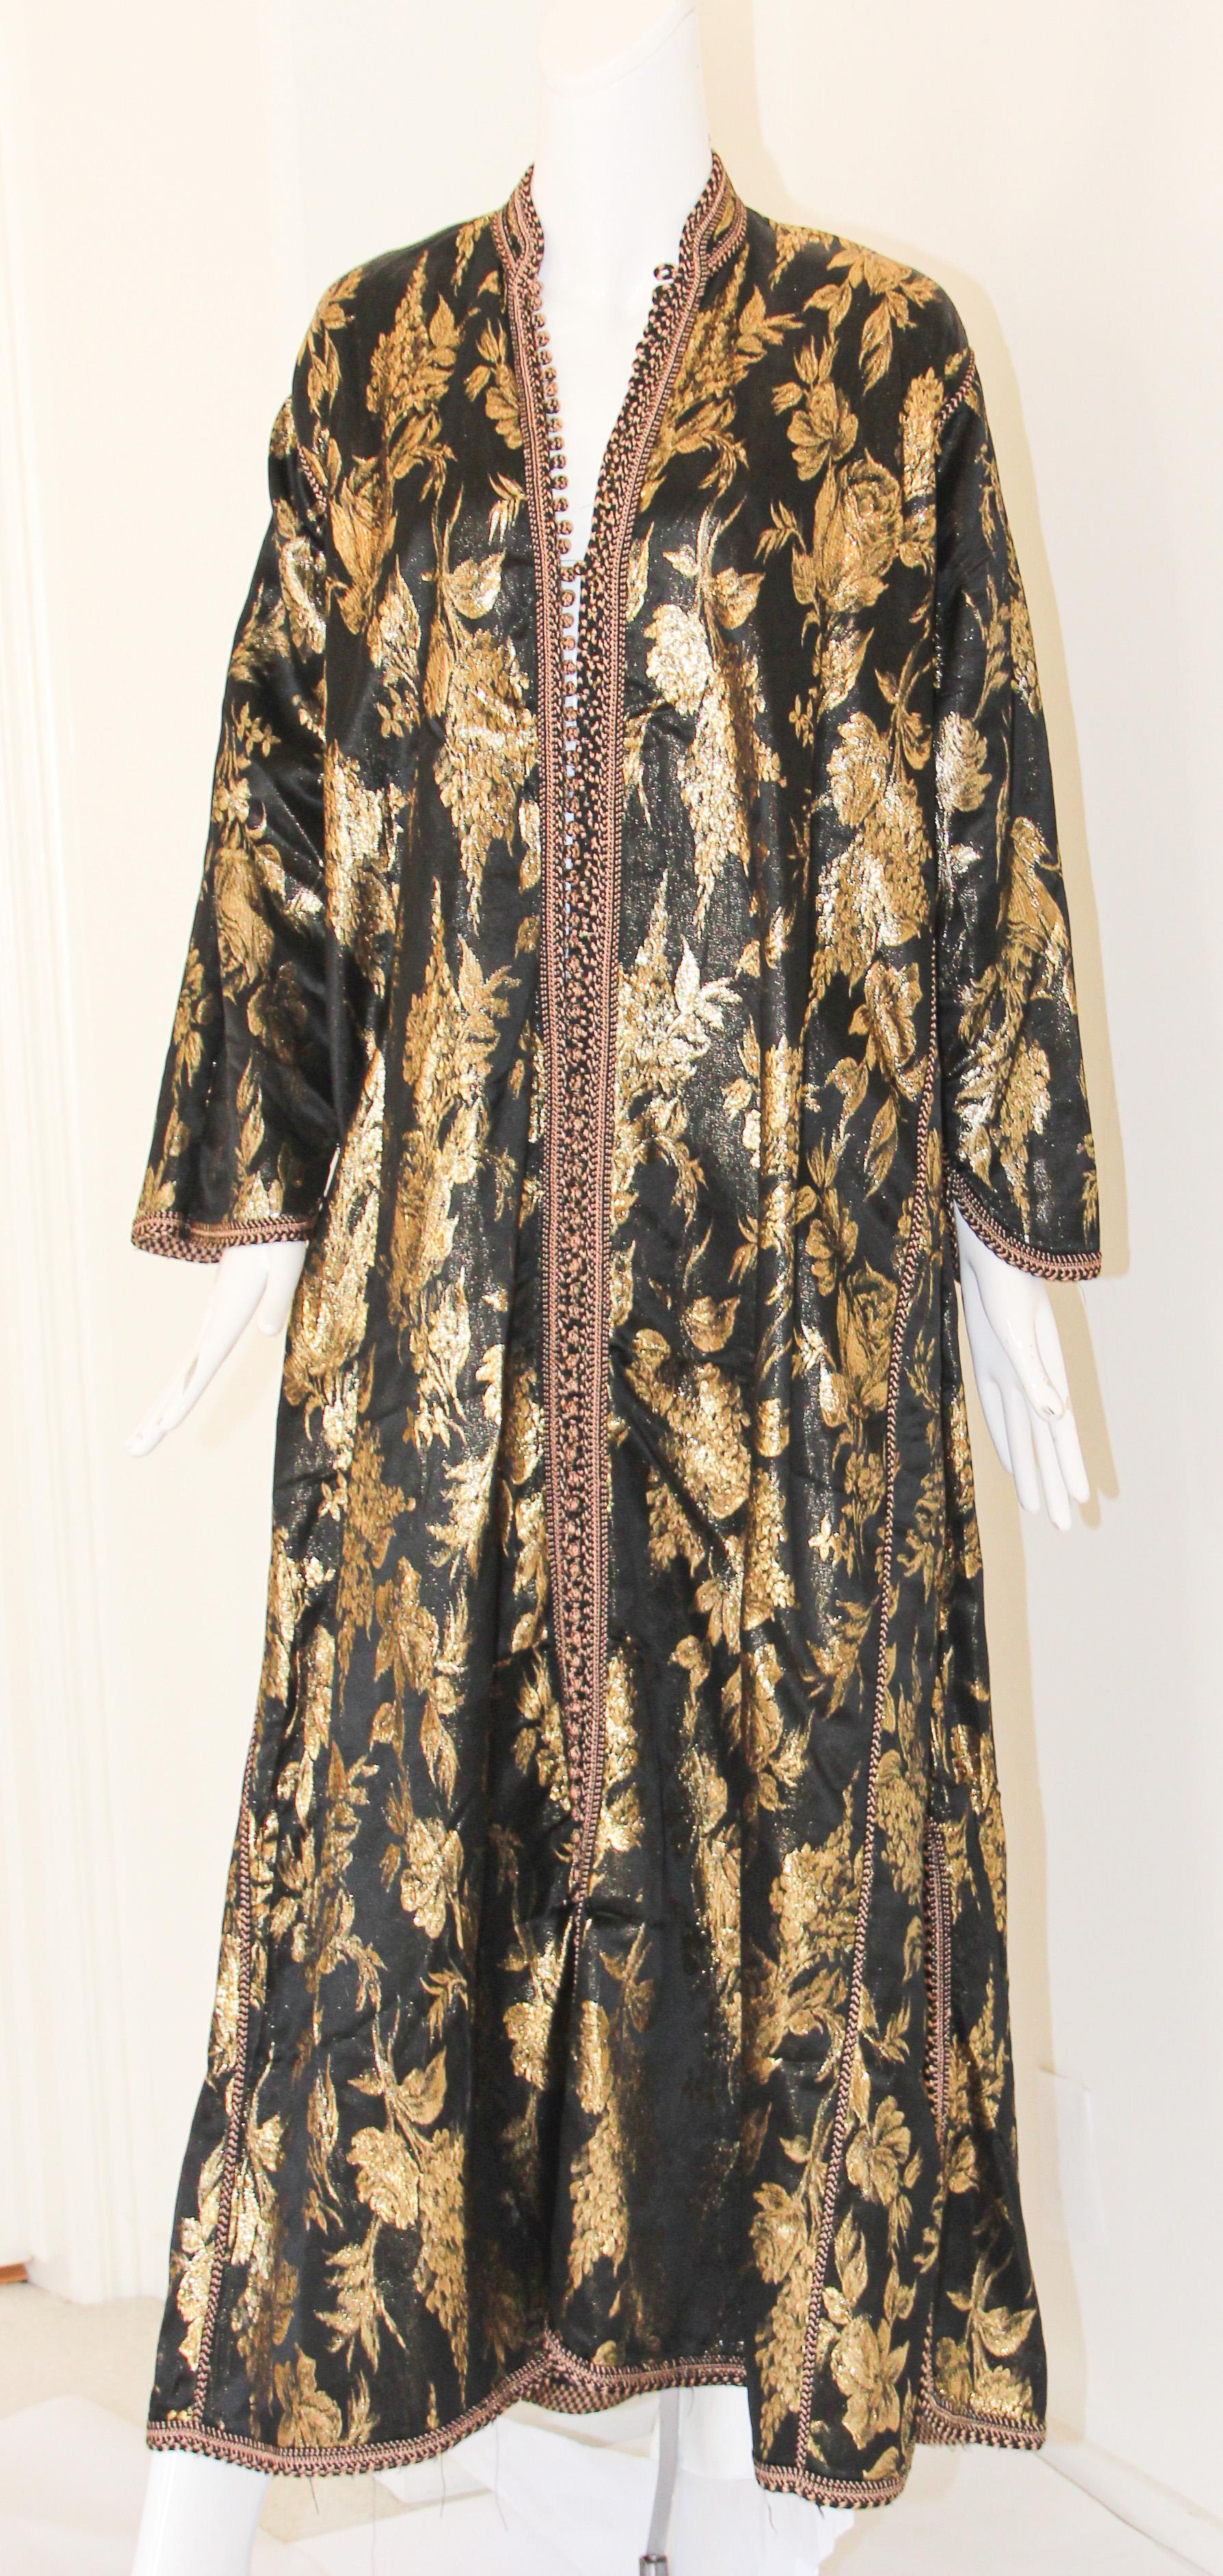 Amazing vintage Moroccan Caftan, black silk damask heavily with gold threads. Circa 1960's
The black heavy damask kaftan was entirely made by hand, fully lined.
One of a kind evening antique Moorish gown.
This authentic caftan has been hand-sewn